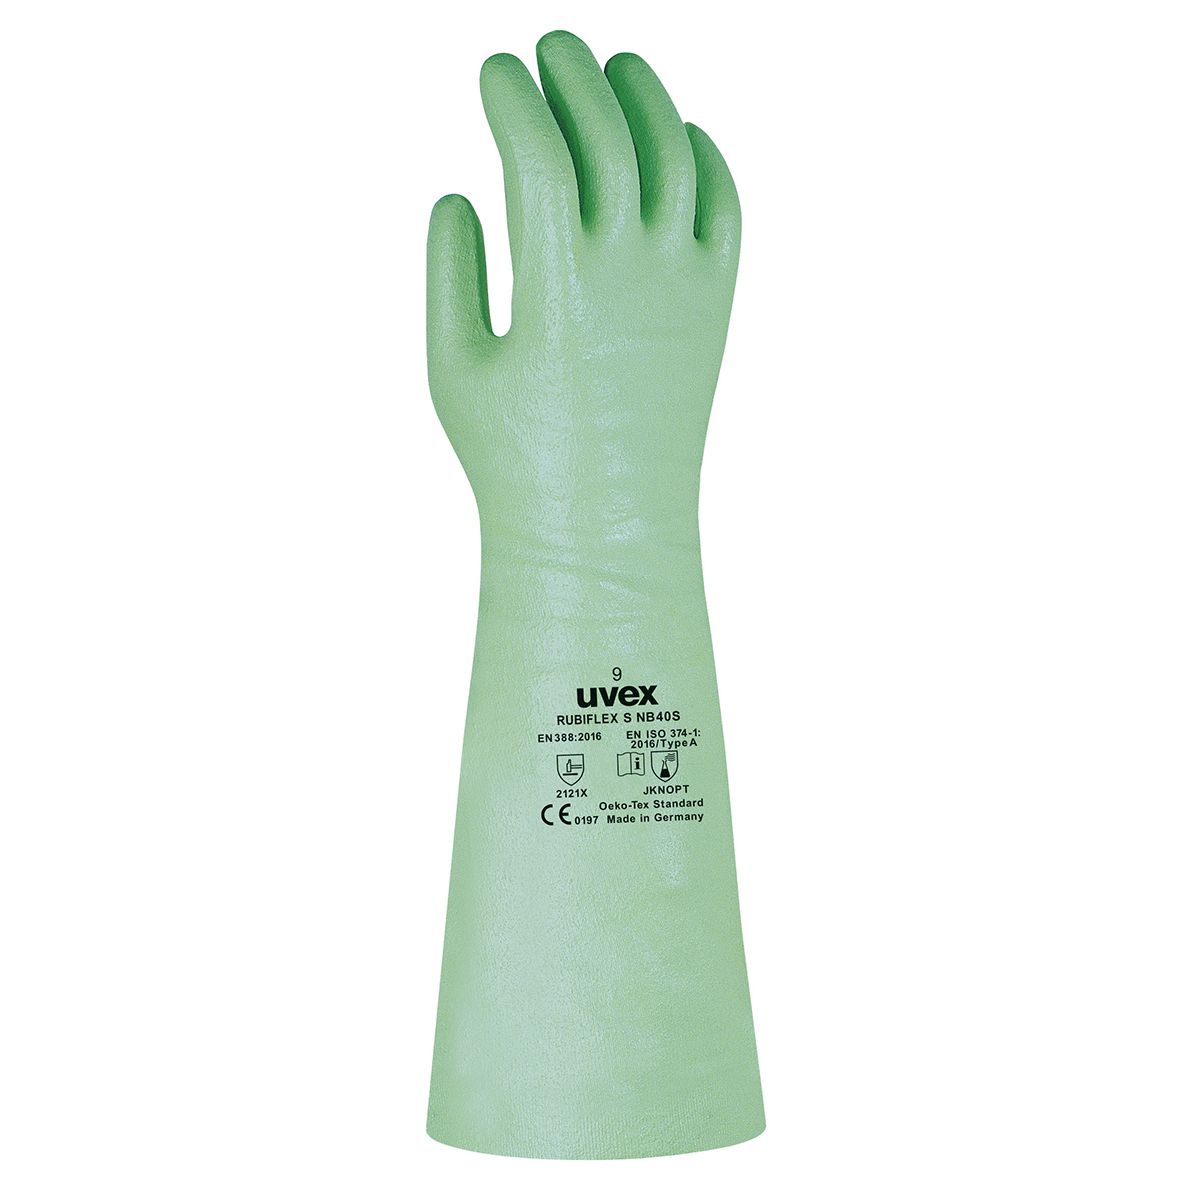 uvex Safety rubiflex NB 40 S, heavy-duty chemical protective glove made of NBR, size 11